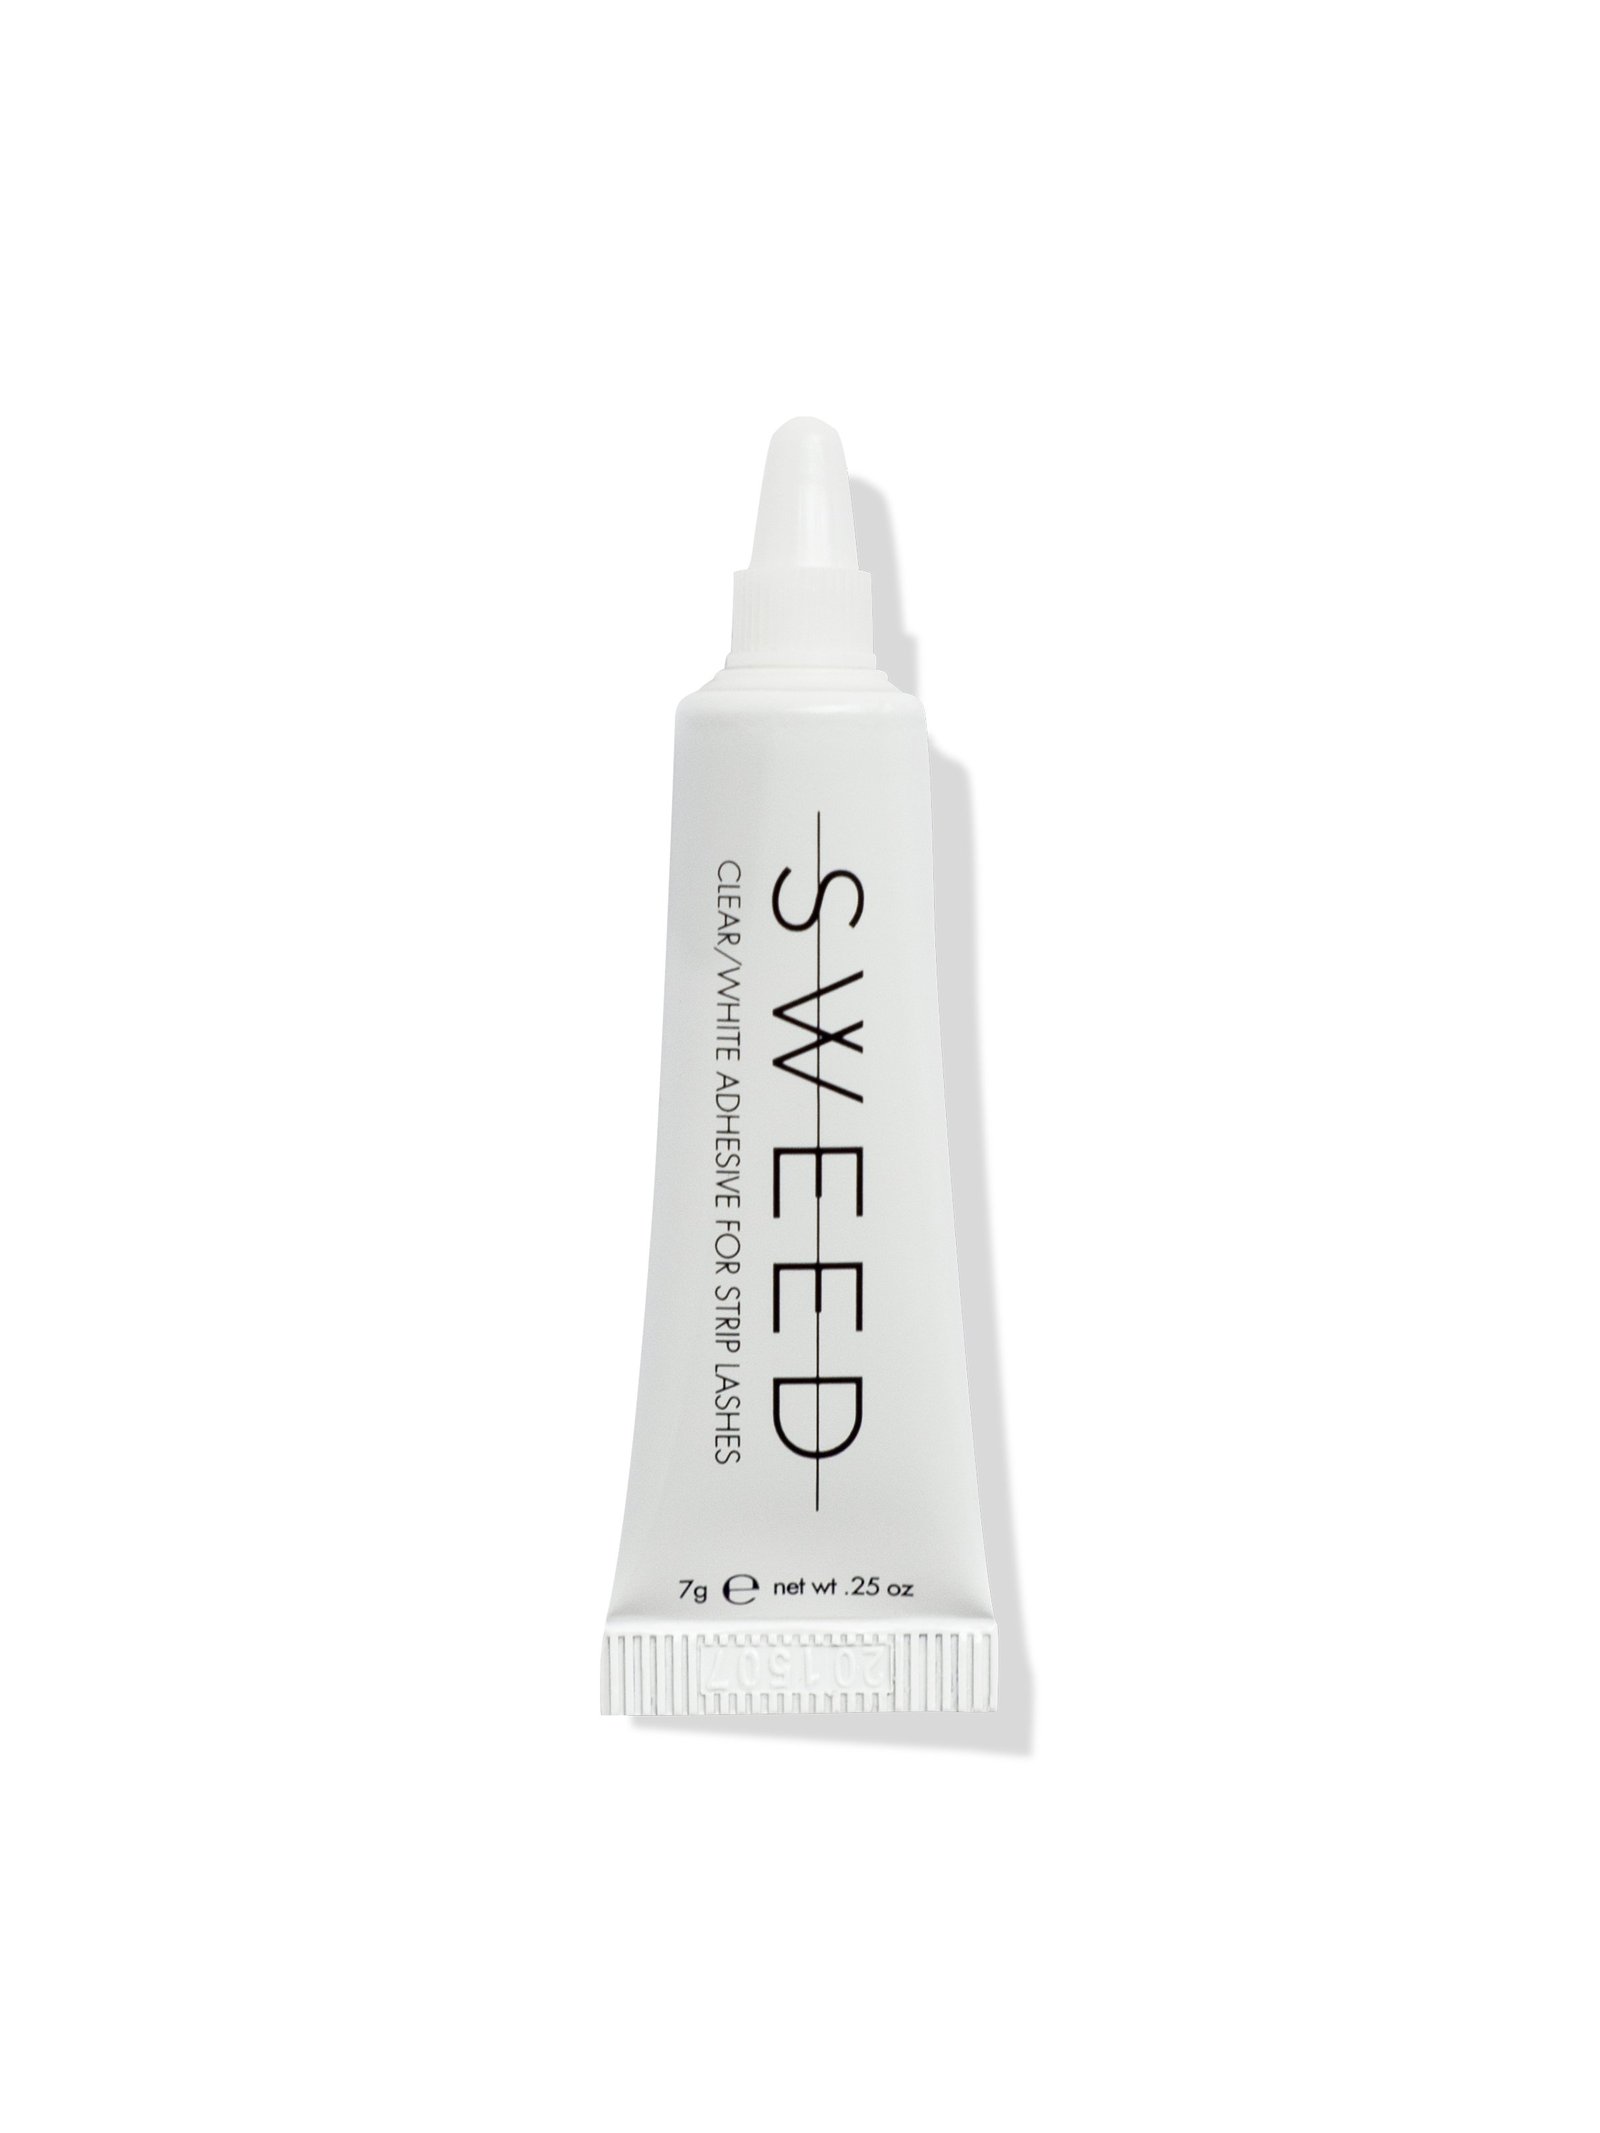 SWEED Adhesive for Strip Lashes Clear/White